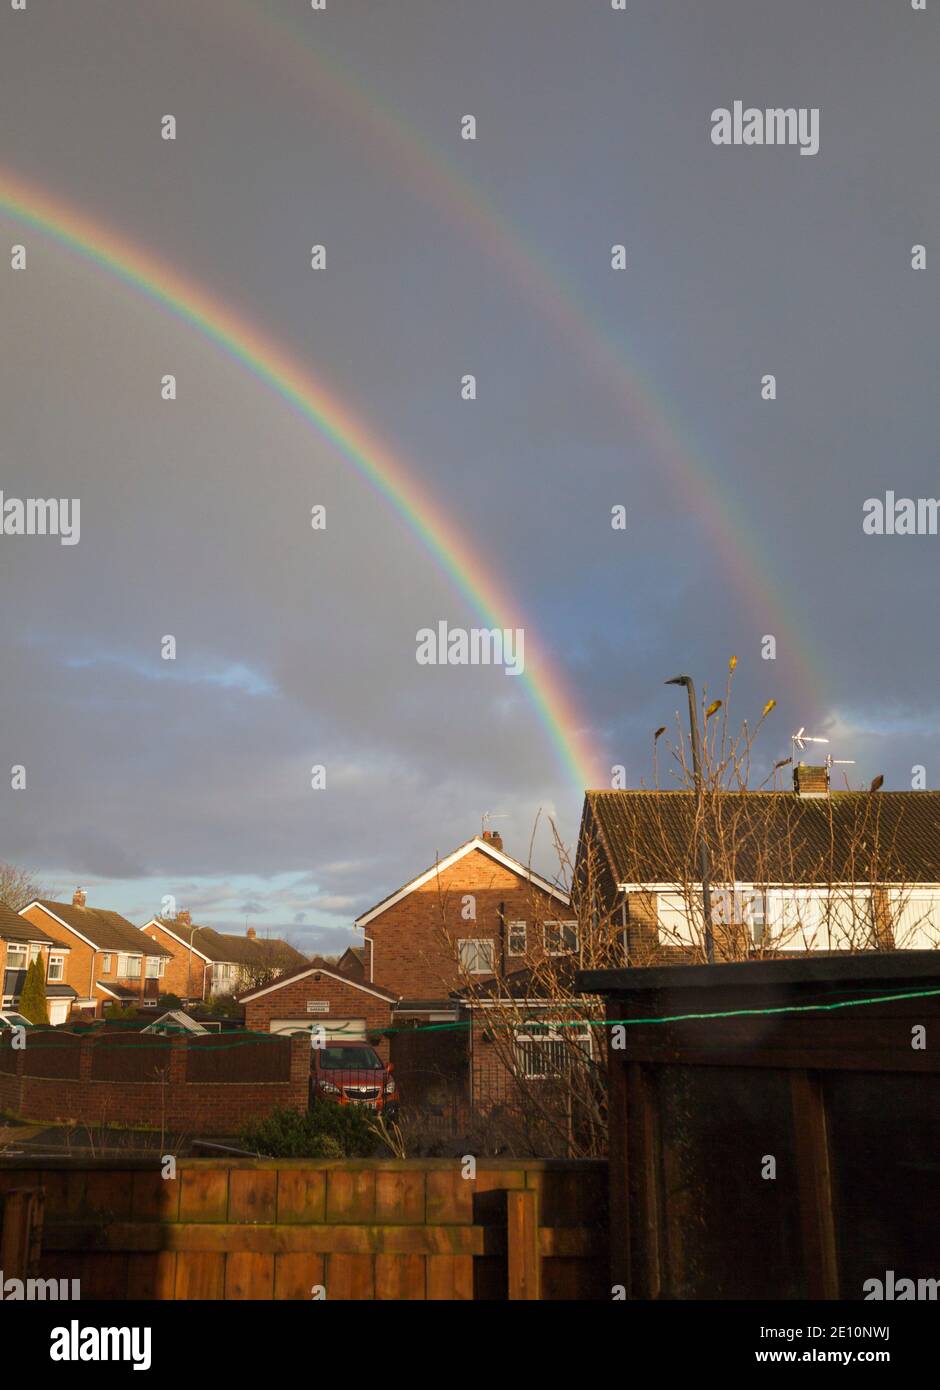 Stockton on Tees, UK. 3rd January 2021. Weather. A double rainbow in the sky as the weather alternates between showers and sunshine. David Dixon / Alamy Stock Photo